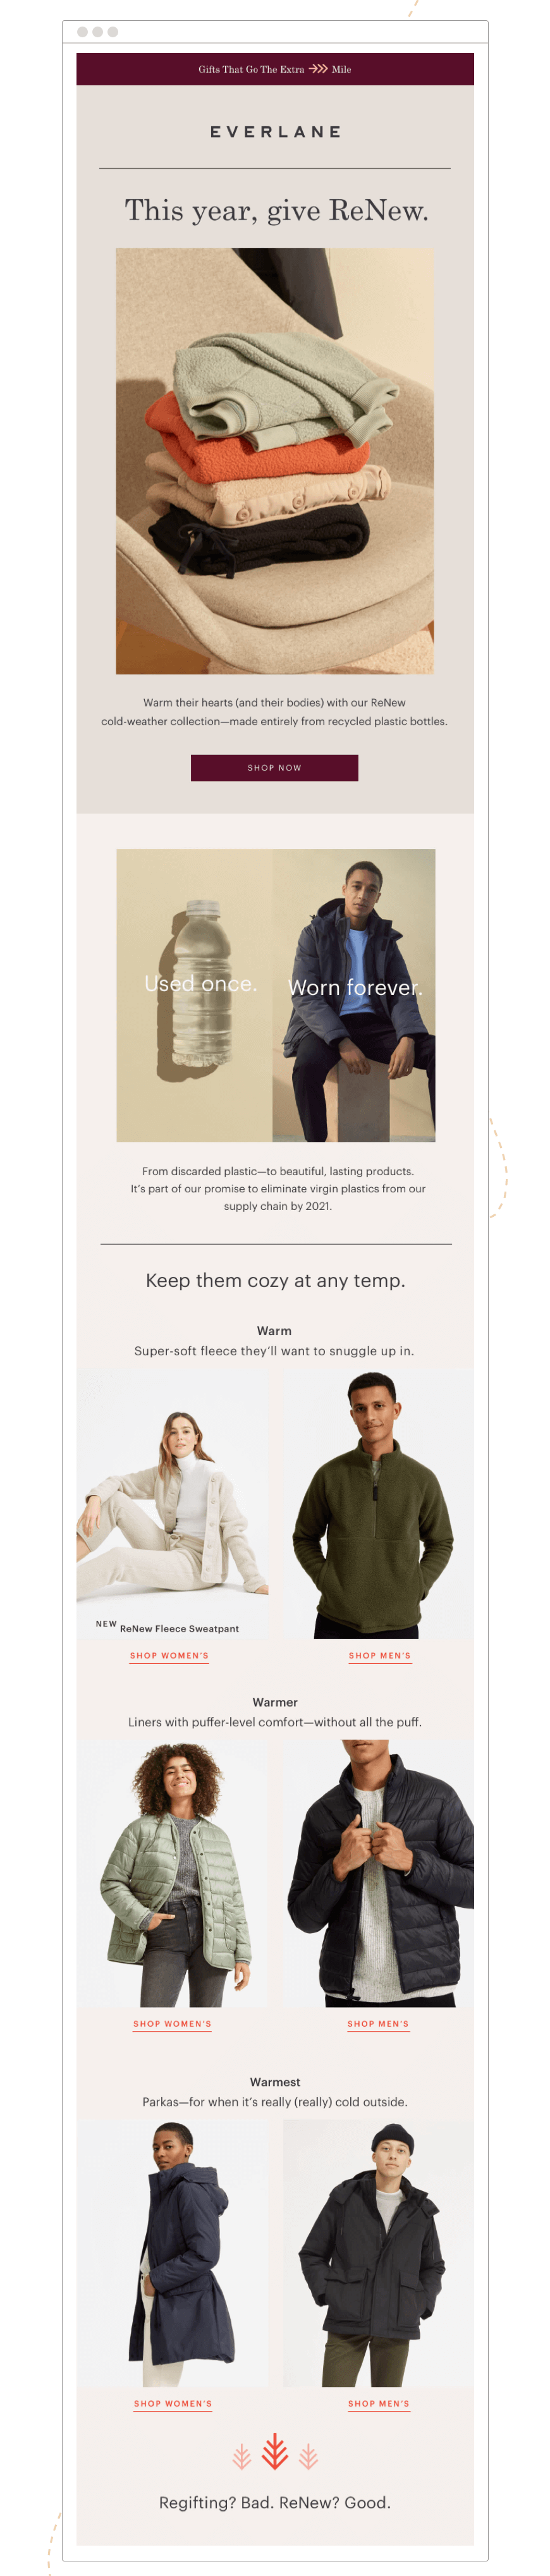 Everlane_Holiday_Email_Template